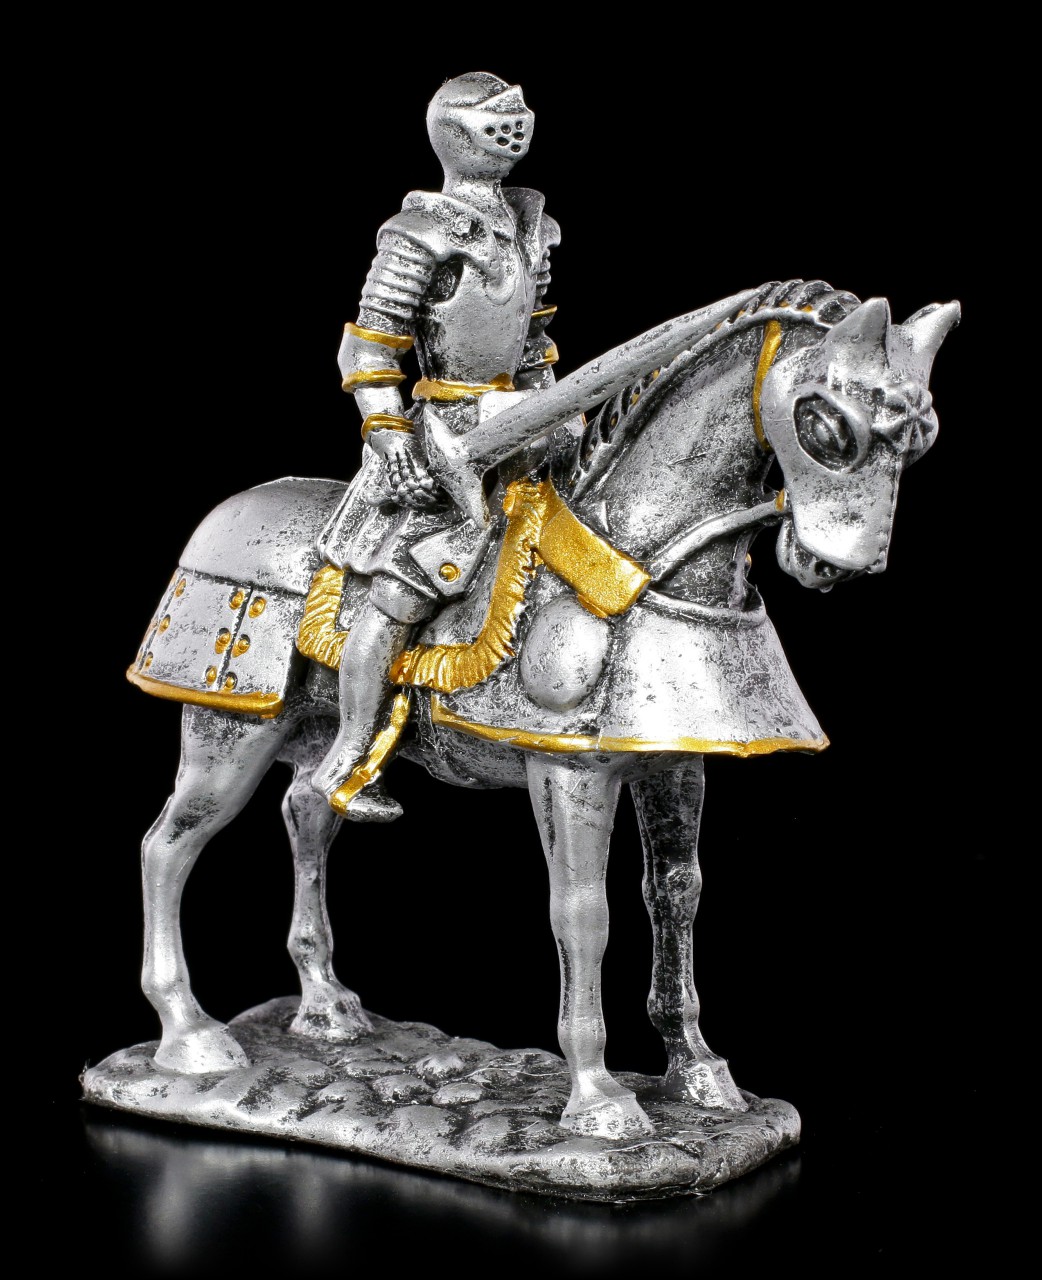 Small Knight Figurine on Horse with Sword